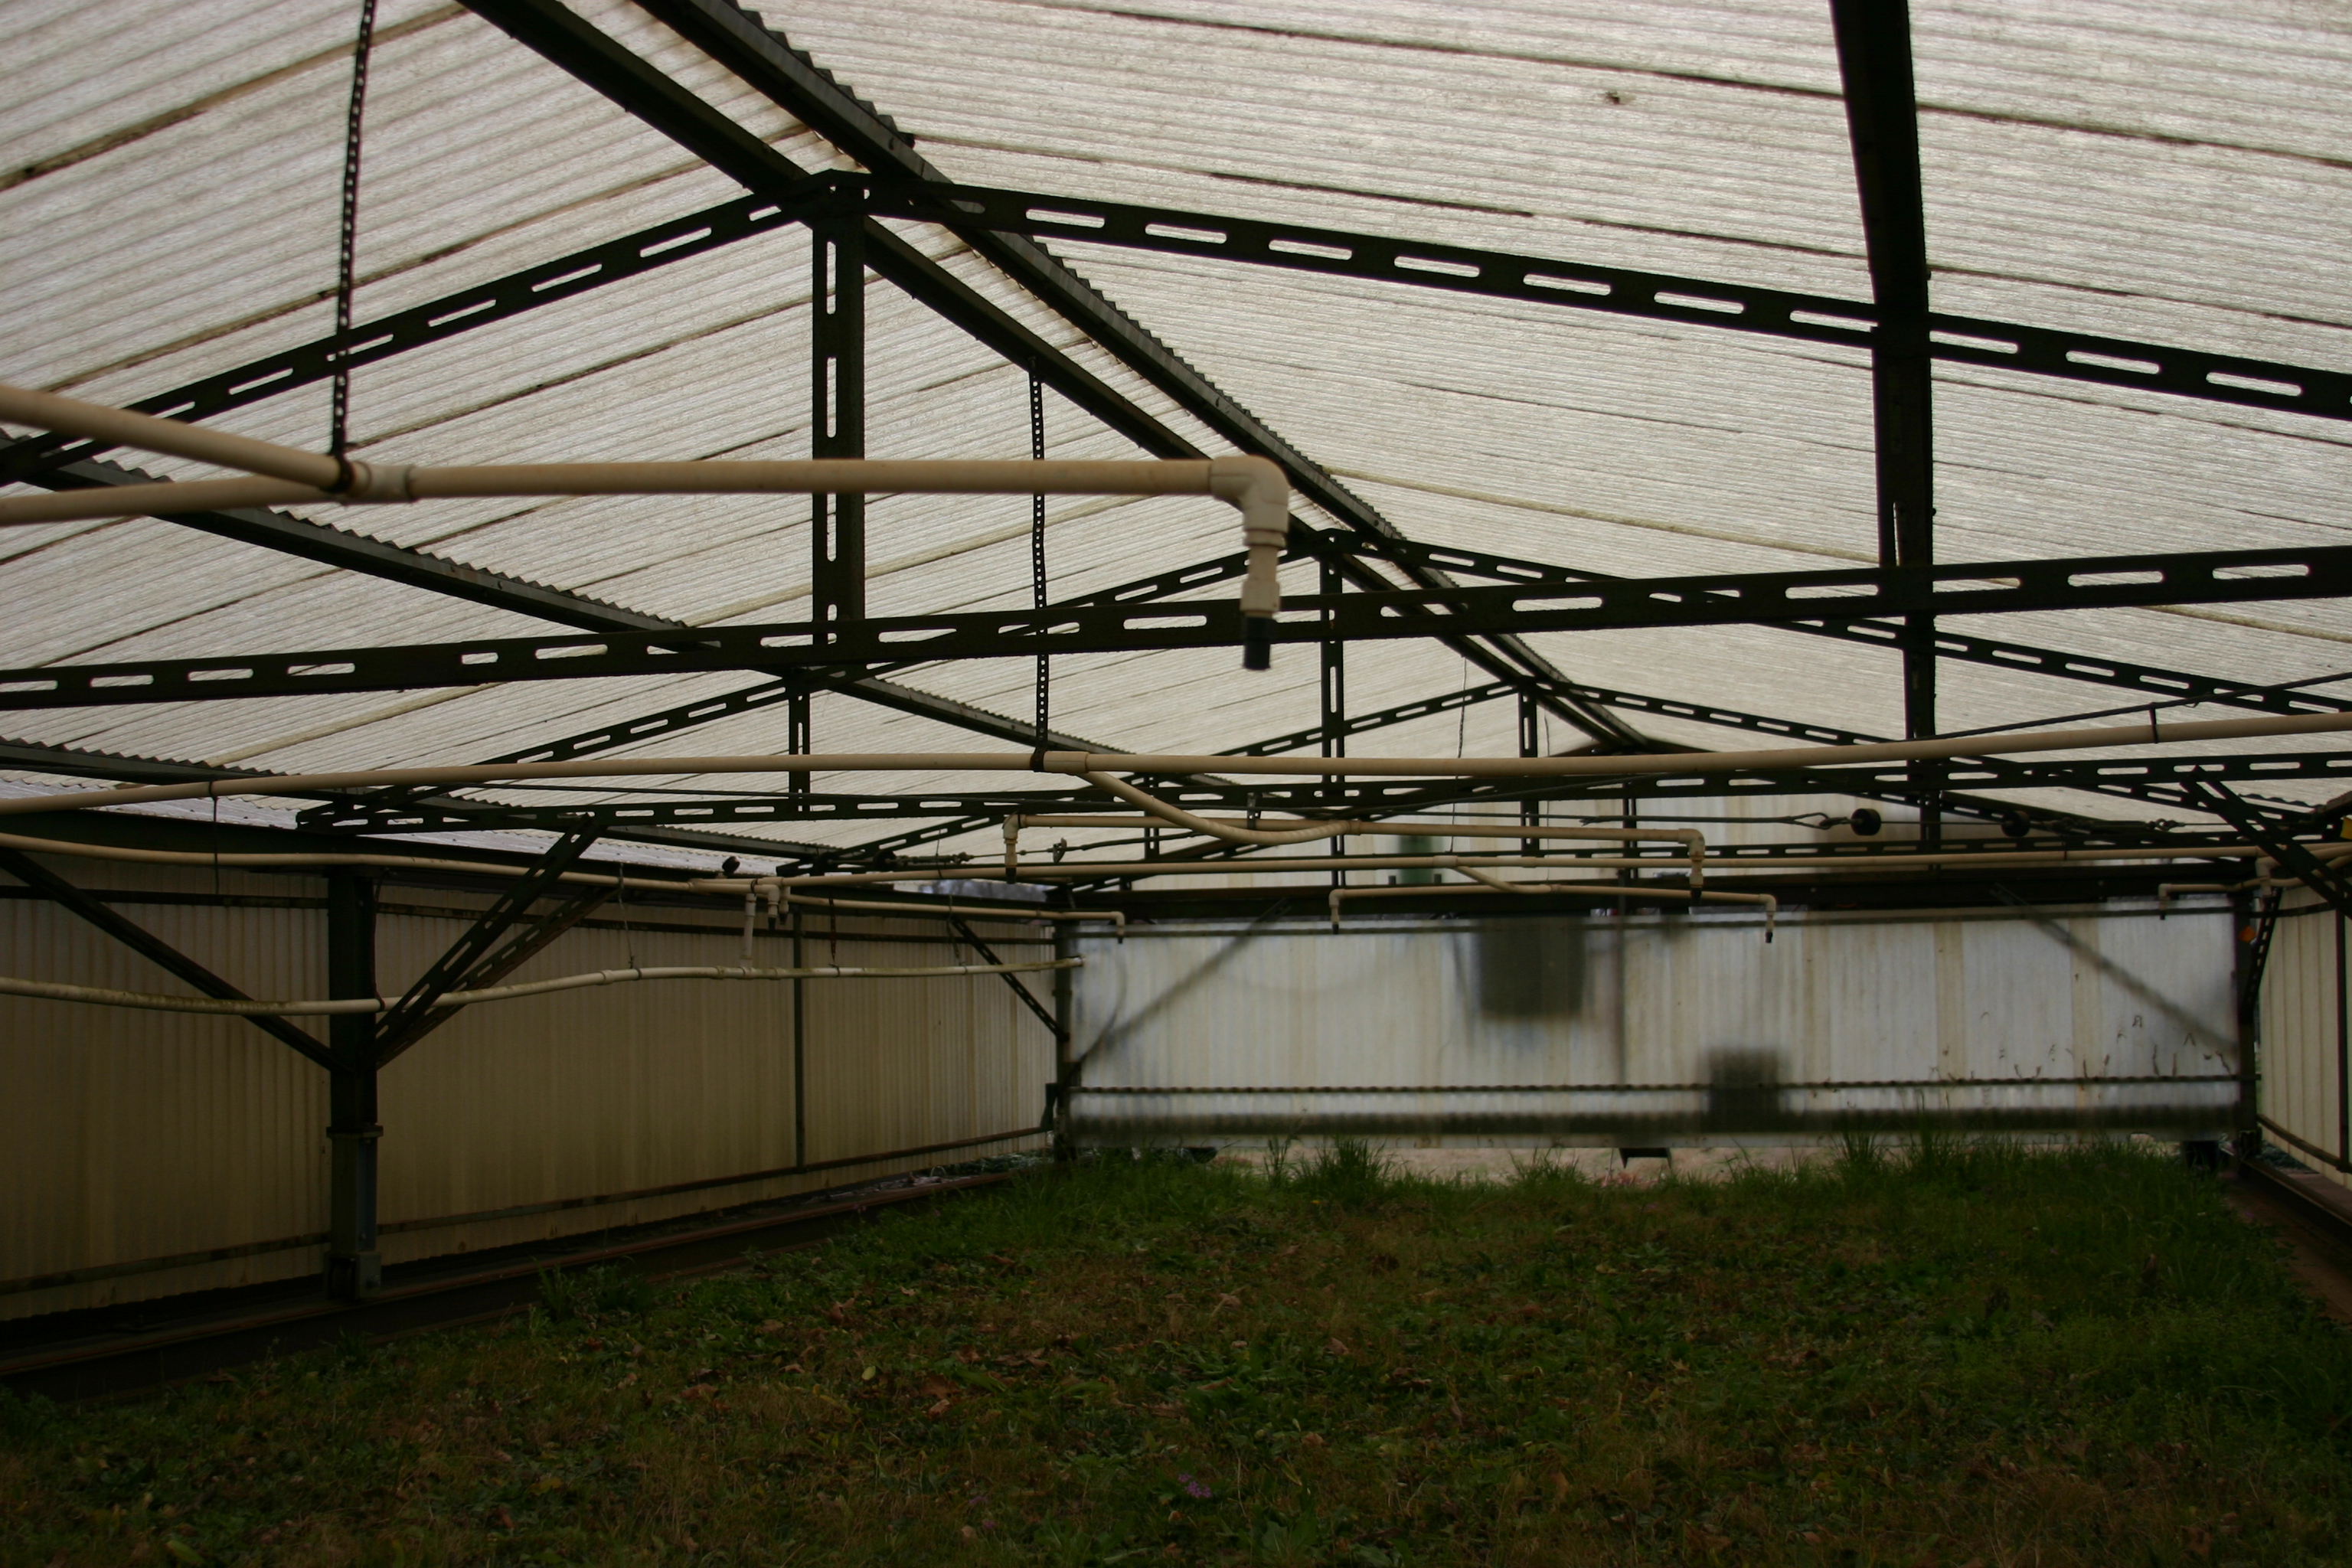 Images showcasing the structure and design of the small rainout shelter created by University of Georgia.